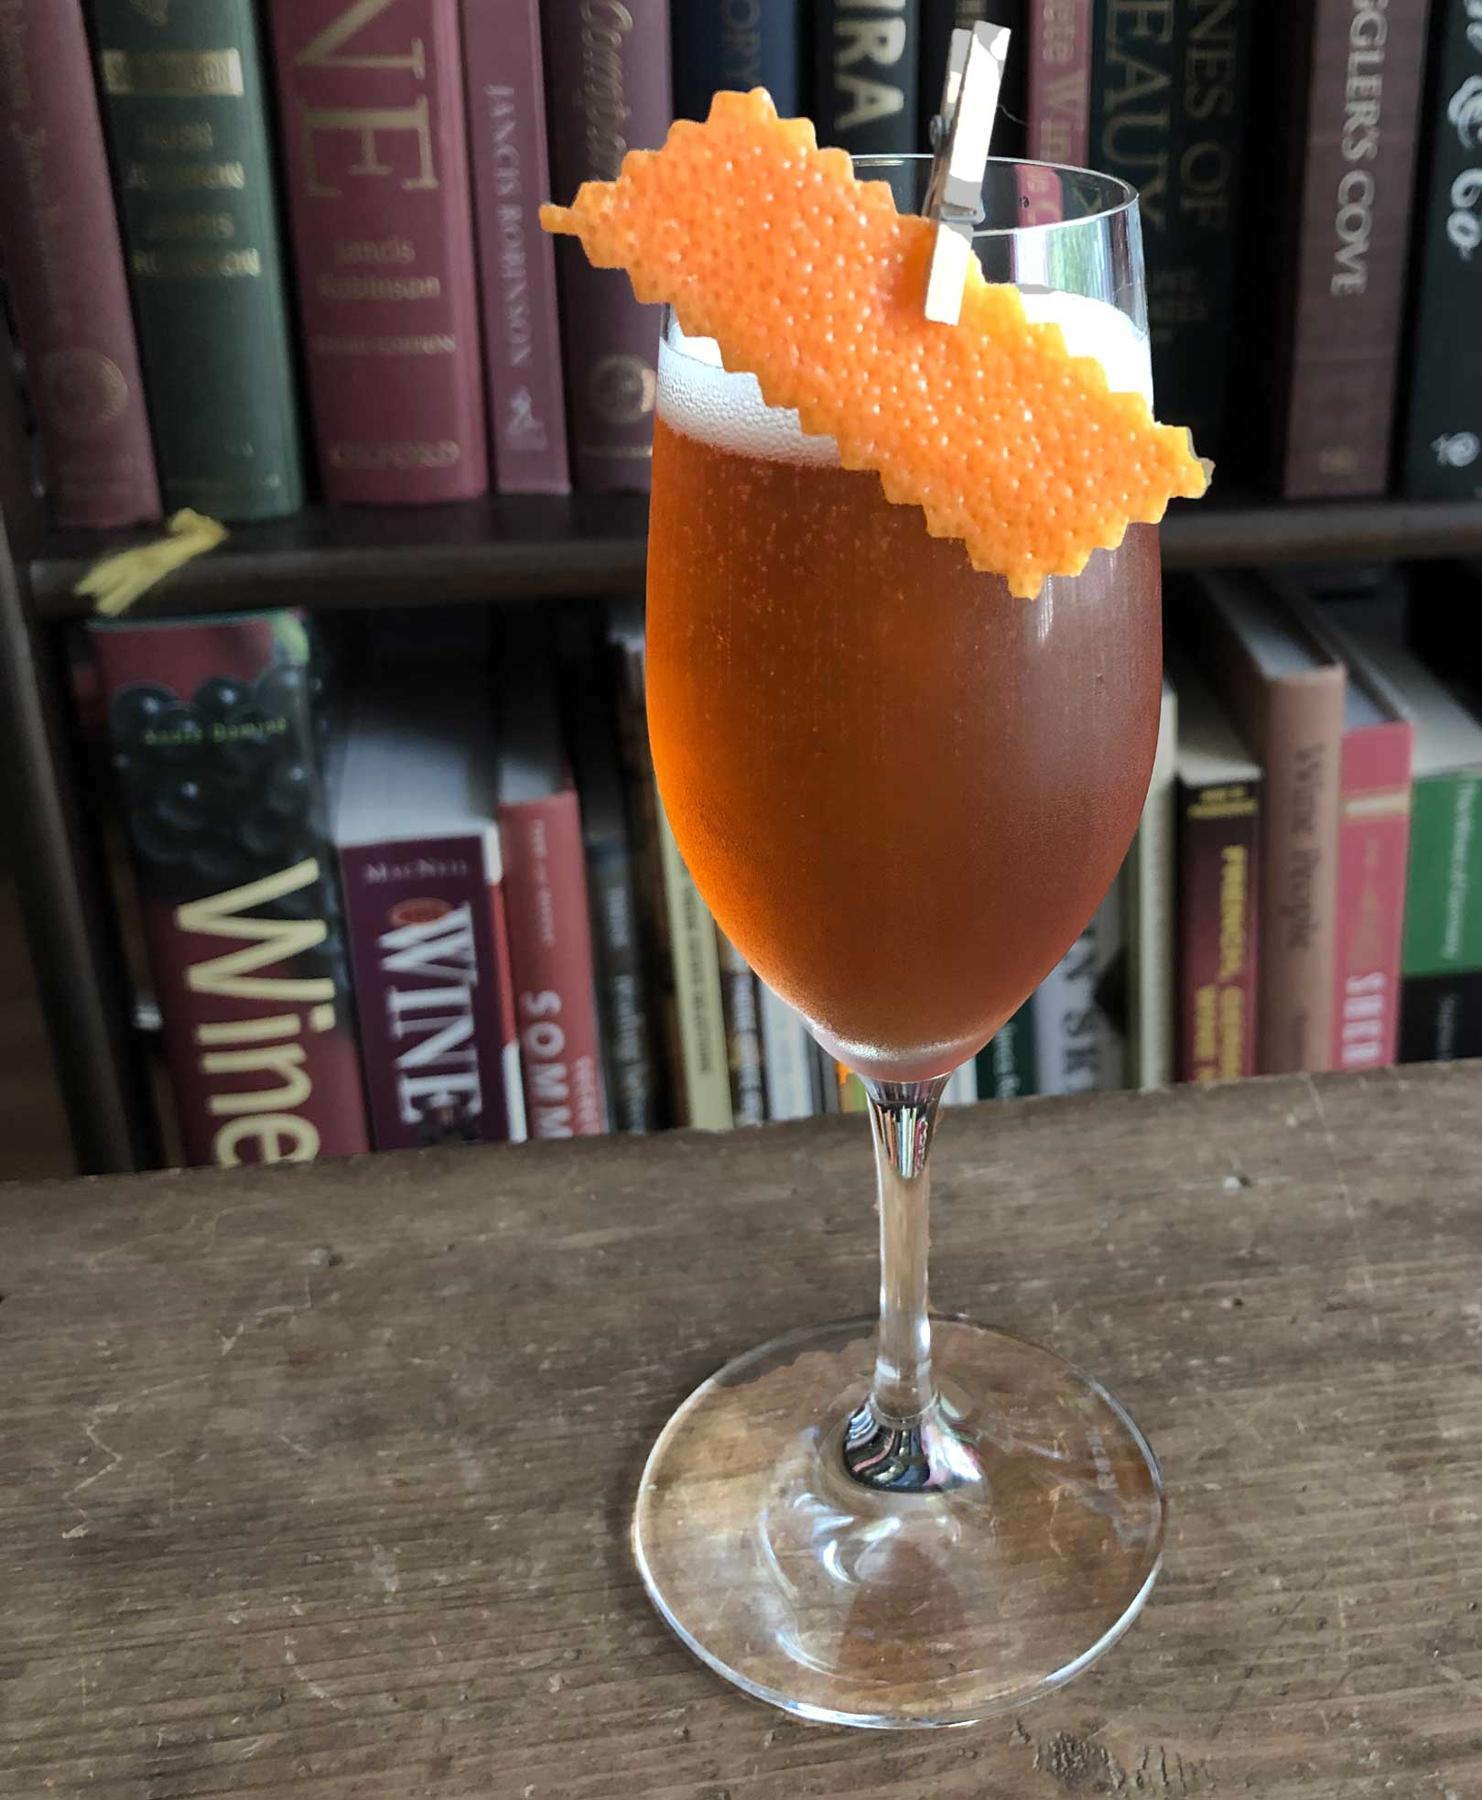 An example of the Gregorian Chant, the mixed drink (drink) featuring sparkling wine, Hayman’s Sloe Gin, Amaro Alta Verde, Bénédictine, sparkling wine, and grapefruit twist; photo by Lee Edwards